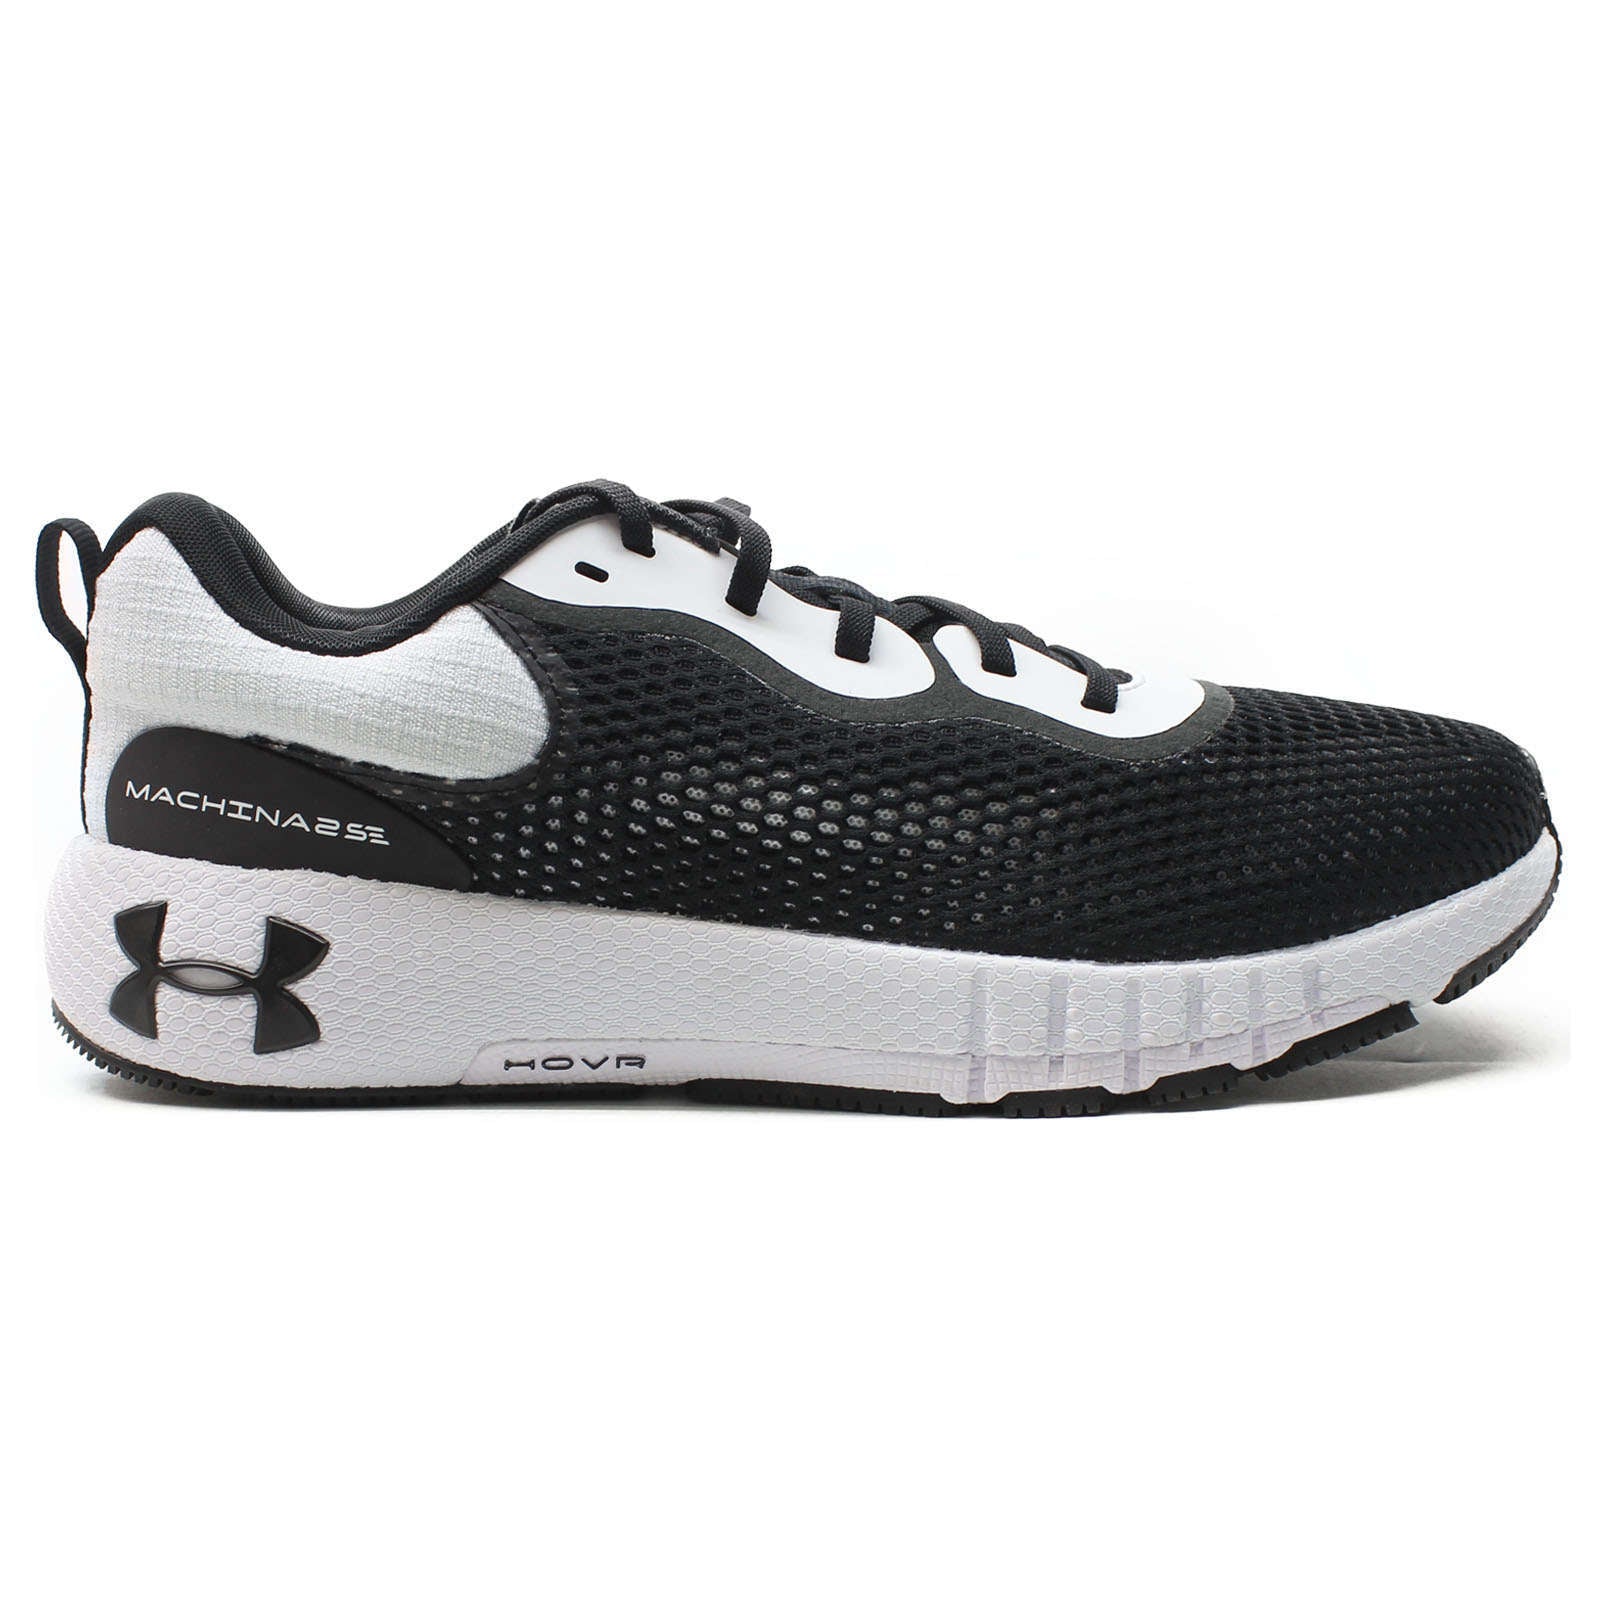 Under Armour HOVR Machina 2 Se Synthetic Textile Men's Low-Top Trainers#color_black white